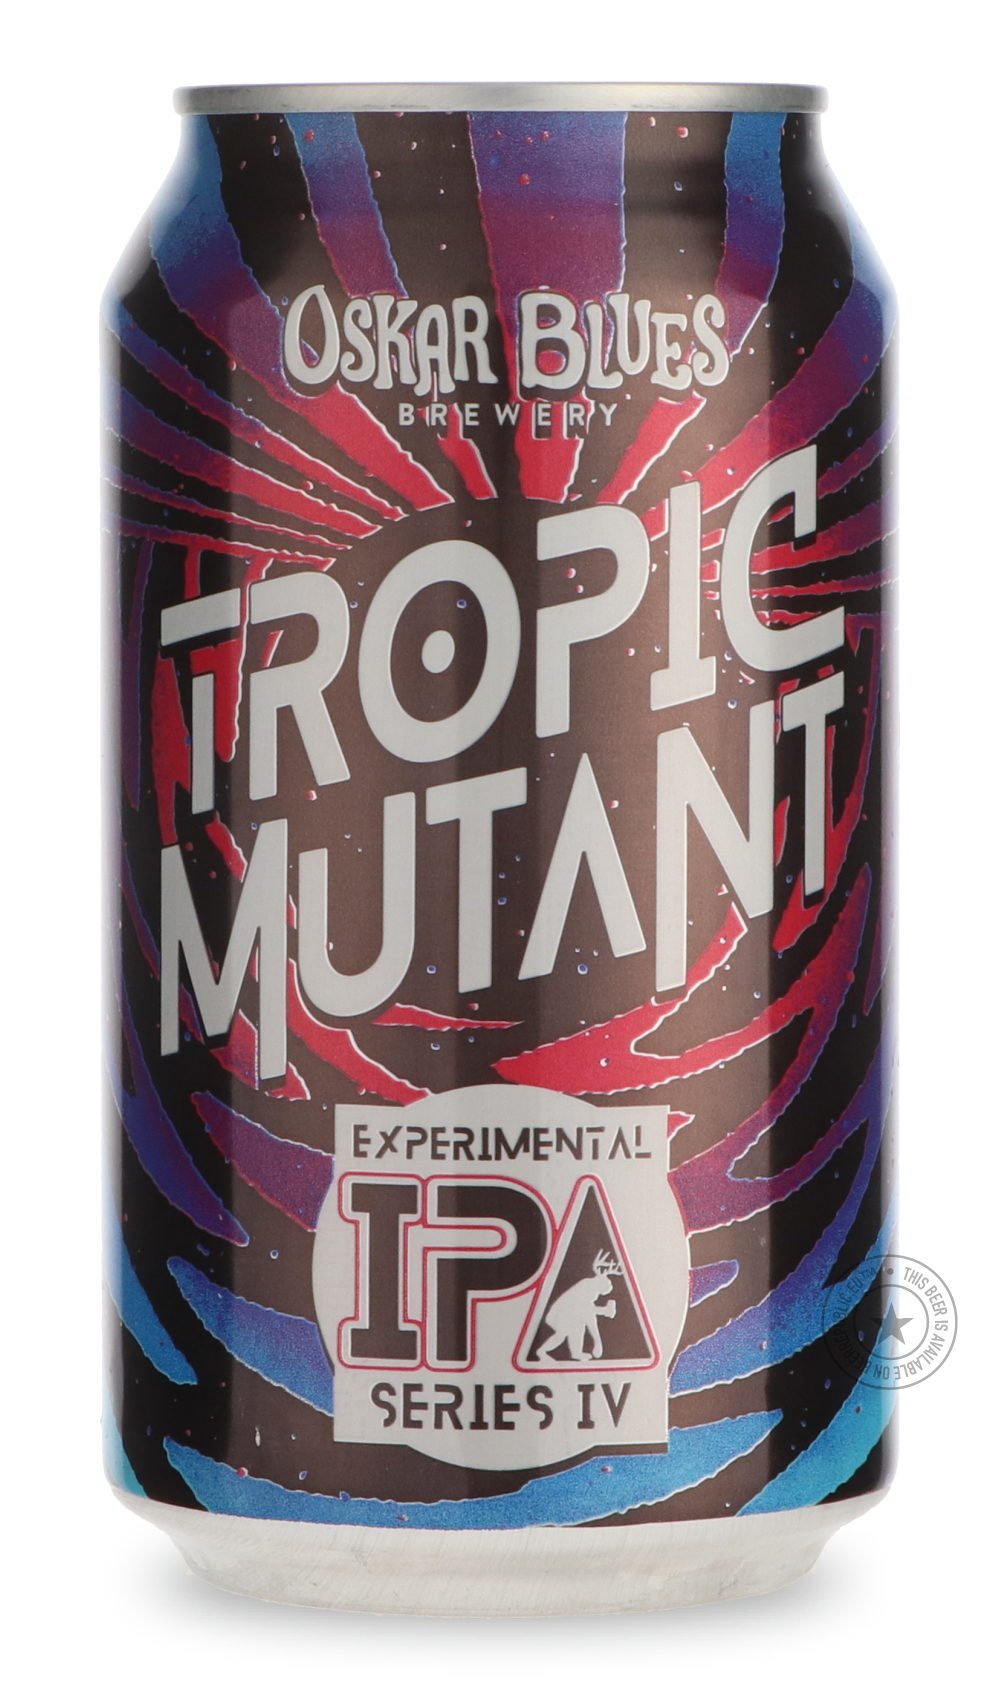 -Oskar Blues- Tropic Mutant-IPA- Only @ Beer Republic - The best online beer store for American & Canadian craft beer - Buy beer online from the USA and Canada - Bier online kopen - Amerikaans bier kopen - Craft beer store - Craft beer kopen - Amerikanisch bier kaufen - Bier online kaufen - Acheter biere online - IPA - Stout - Porter - New England IPA - Hazy IPA - Imperial Stout - Barrel Aged - Barrel Aged Imperial Stout - Brown - Dark beer - Blond - Blonde - Pilsner - Lager - Wheat - Weizen - Amber - Barle